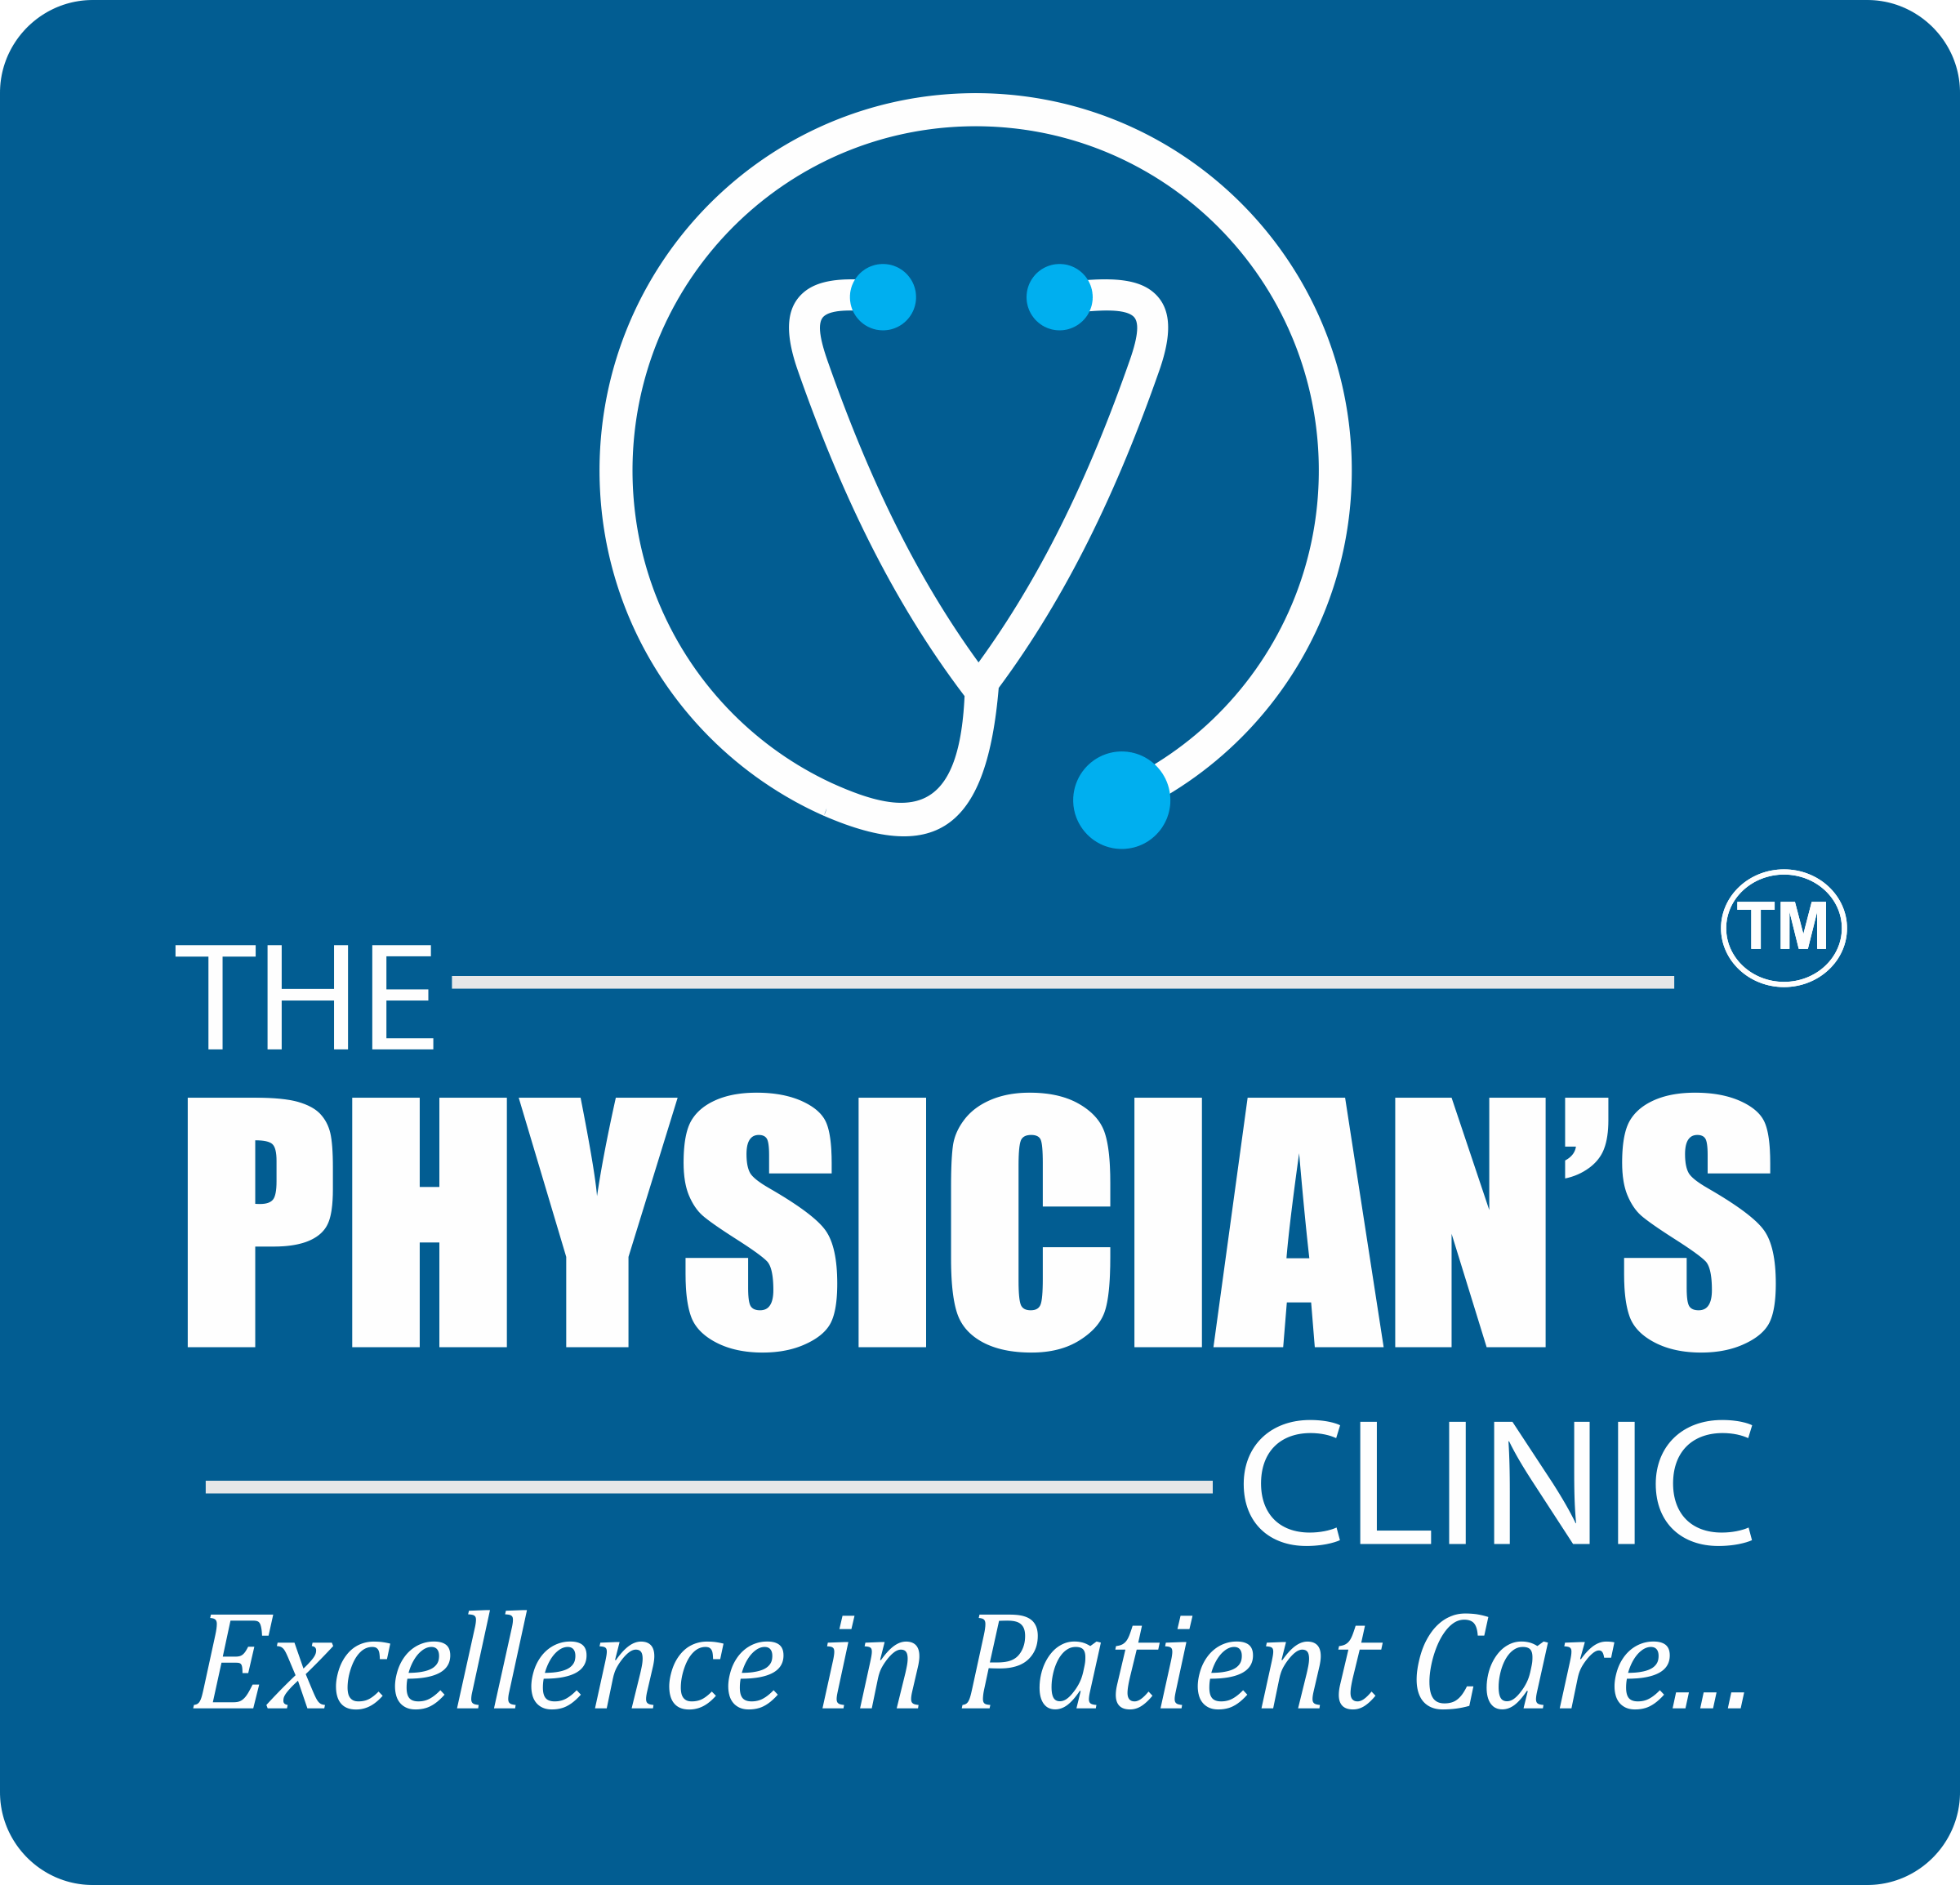 The Physicians Clinic